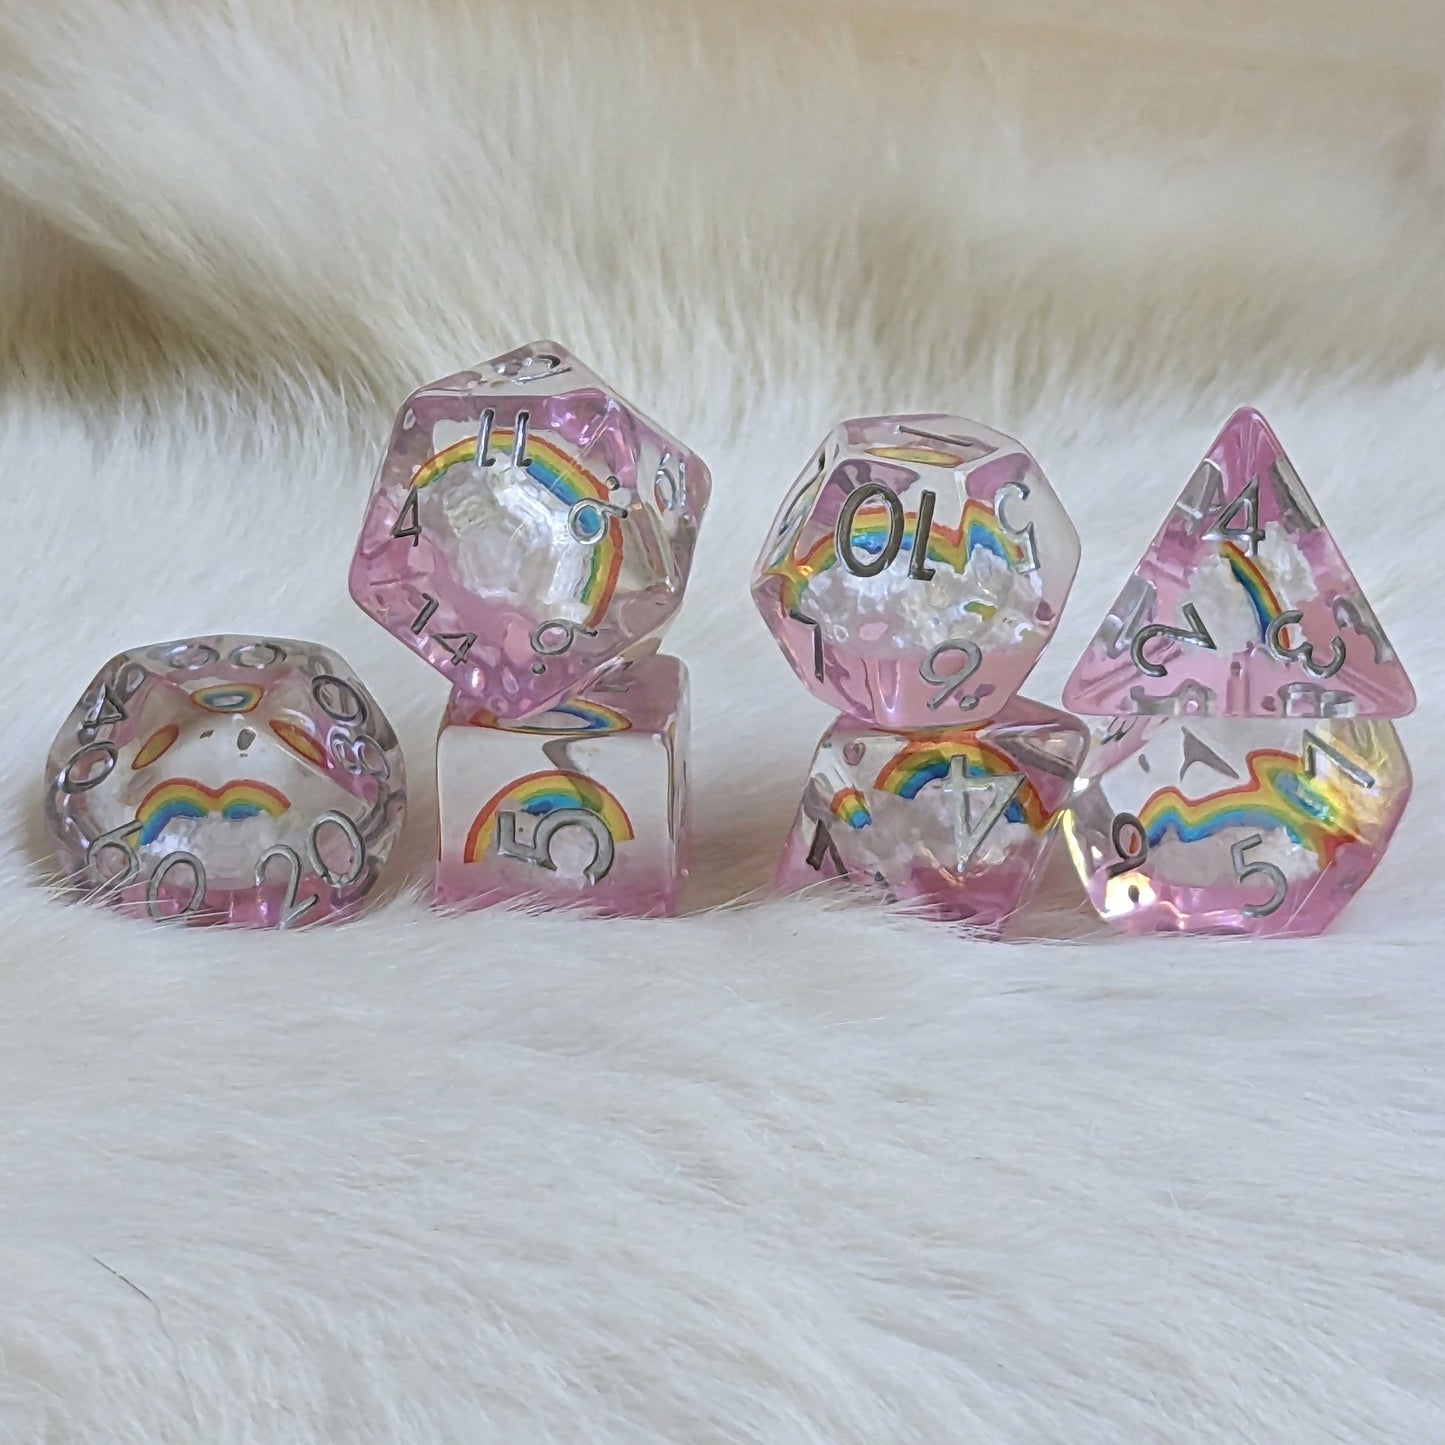 Dreamy Rainbows and Clouds Dice Set.